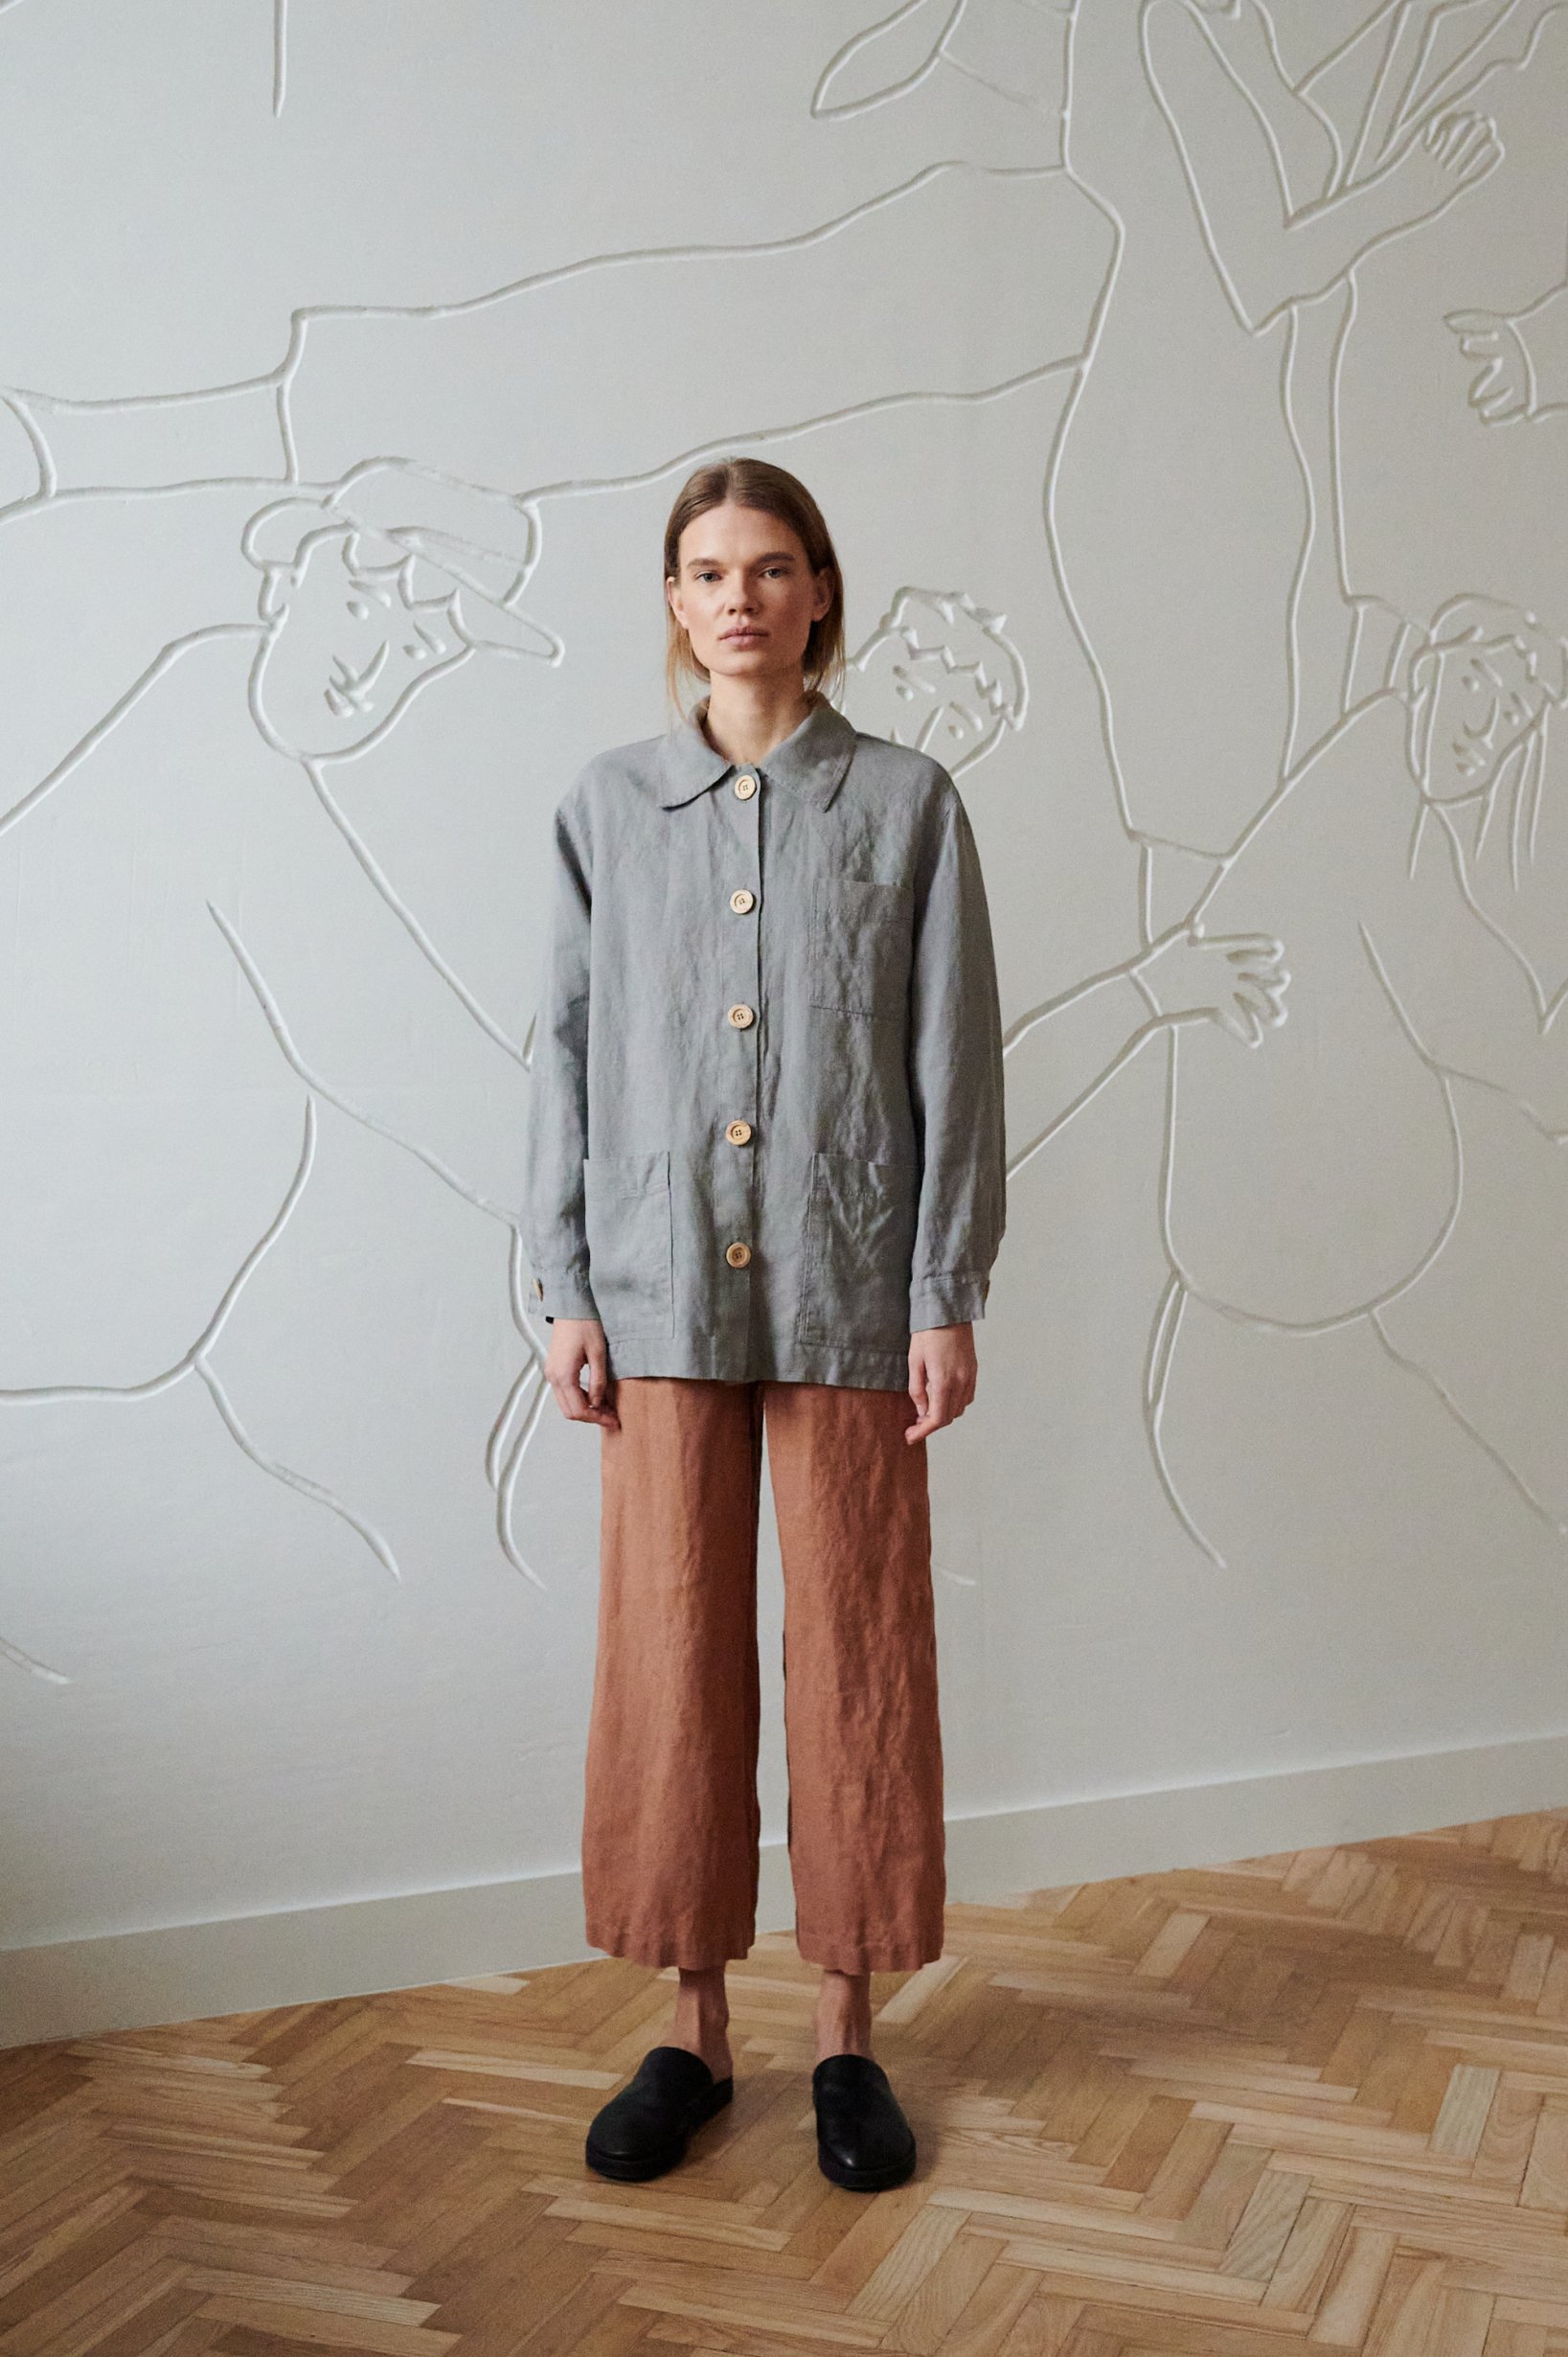 Wide-leg linen trousers and a relaxed fit linen jacket outfit